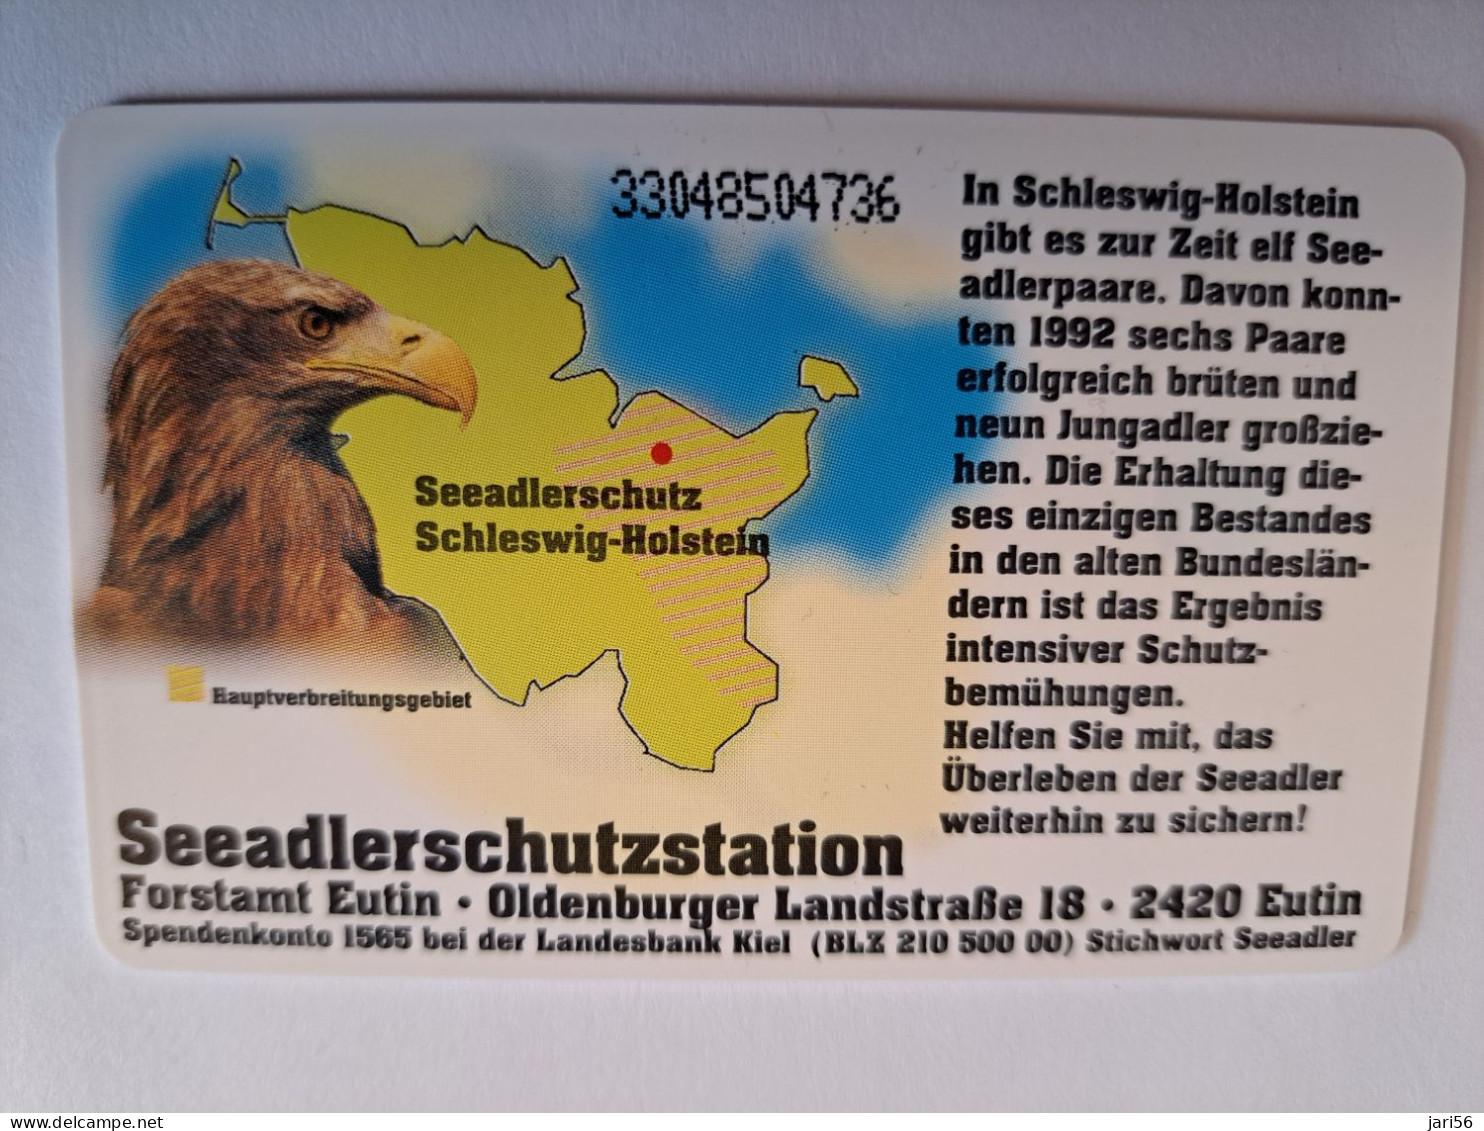 DUITSLAND/ GERMANY  CHIPCARD/ SEA/ EAGLE/ BIRD/ NATUR  / 25.000  EX / 6 DM  CARD / O 708 / MINT CARD **16606** - S-Series : Tills With Third Part Ads